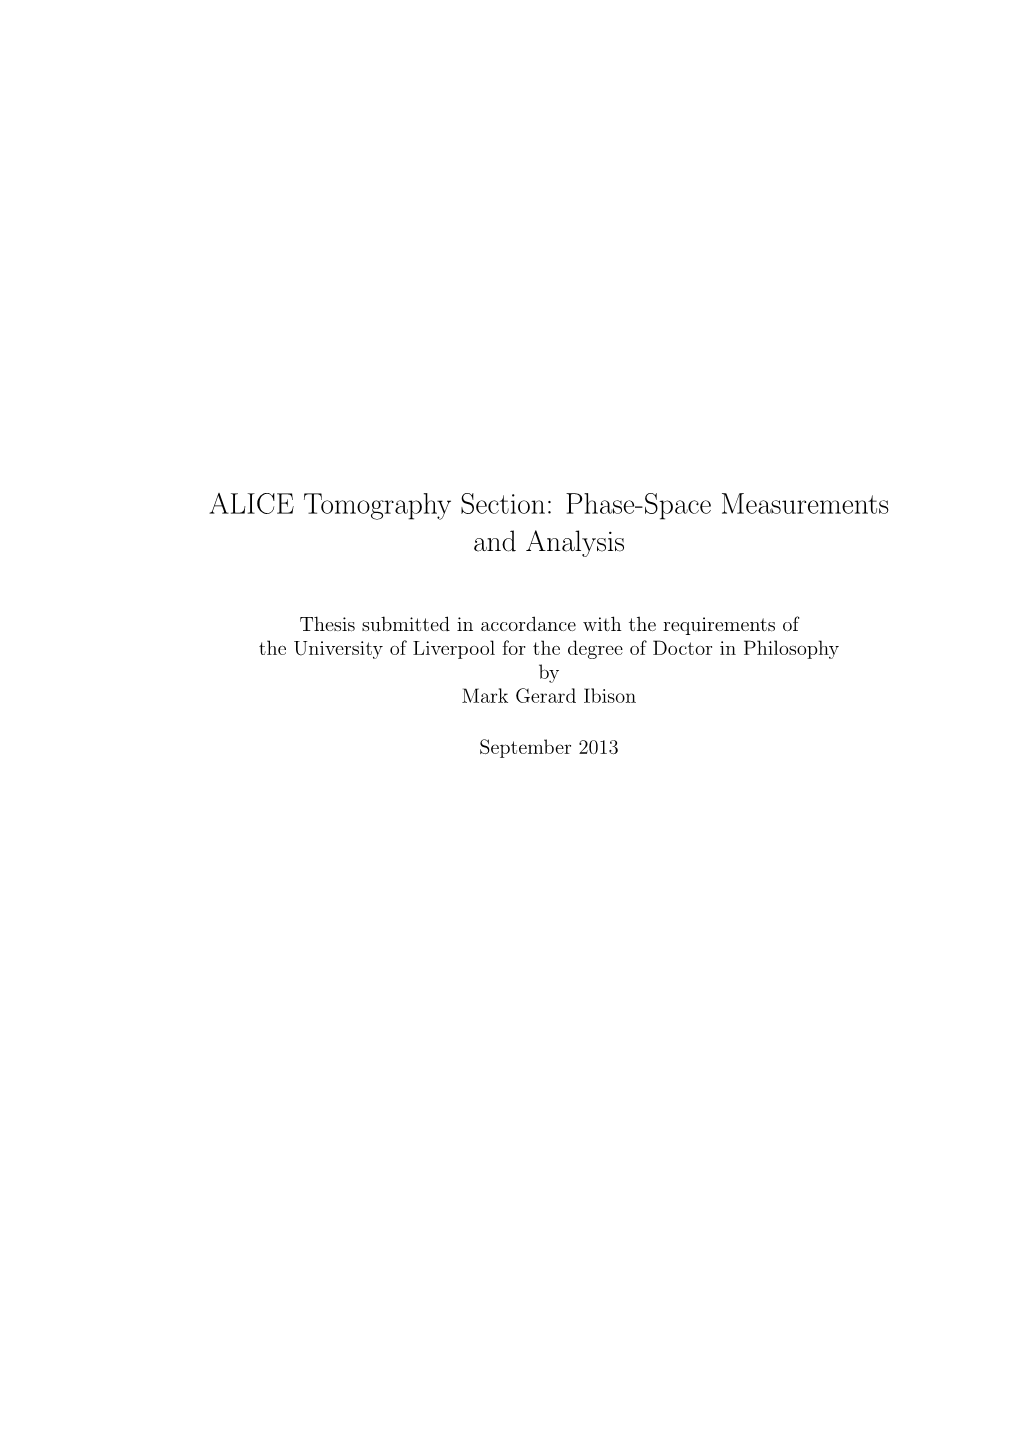 ALICE Tomography Section: Phase-Space Measurements and Analysis